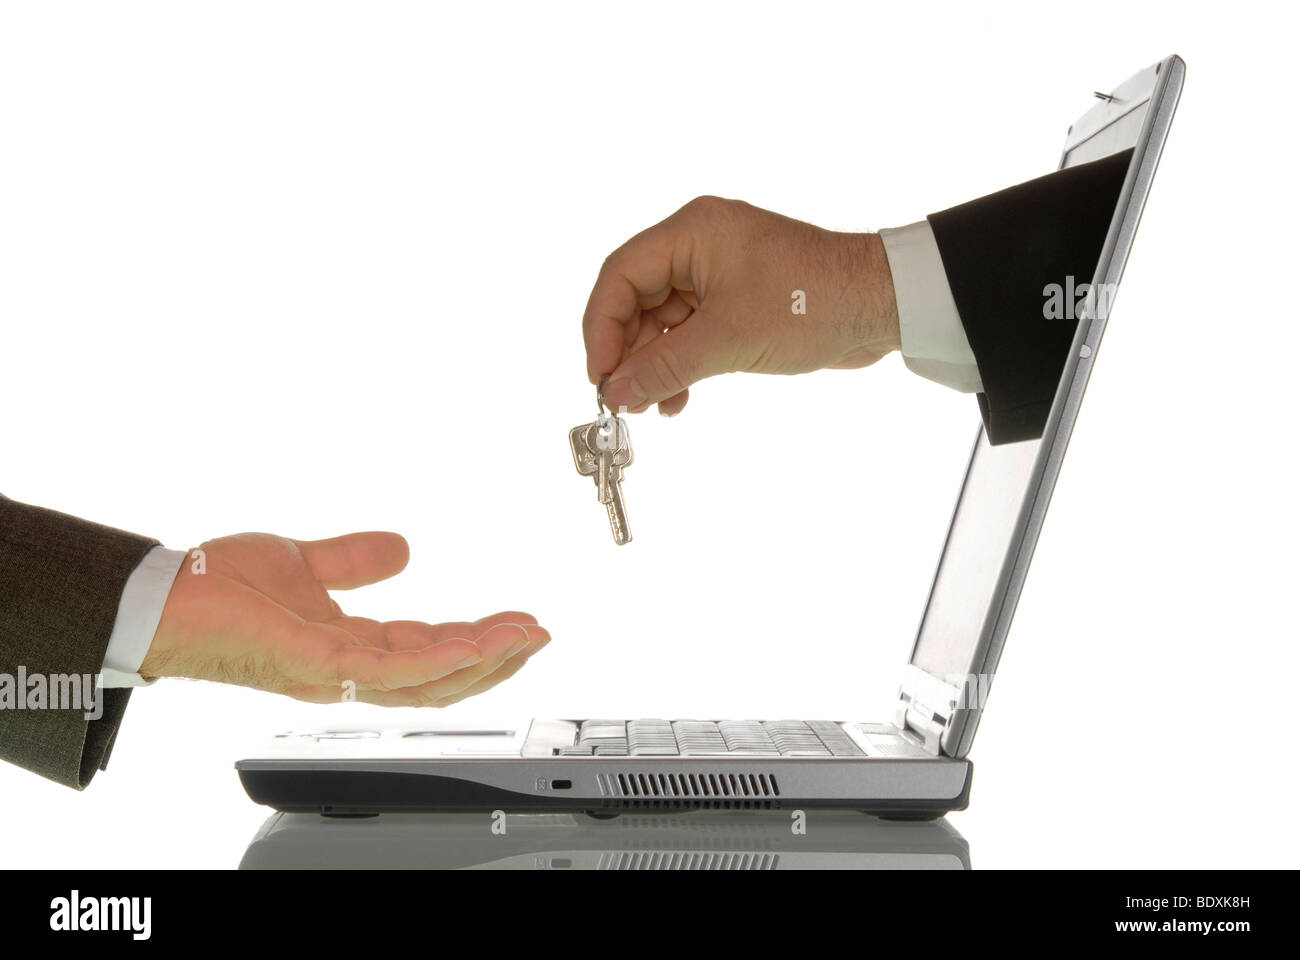 Business man giving a home key to another business man through a computer monitor, symbolic image for real estate market on the Stock Photo